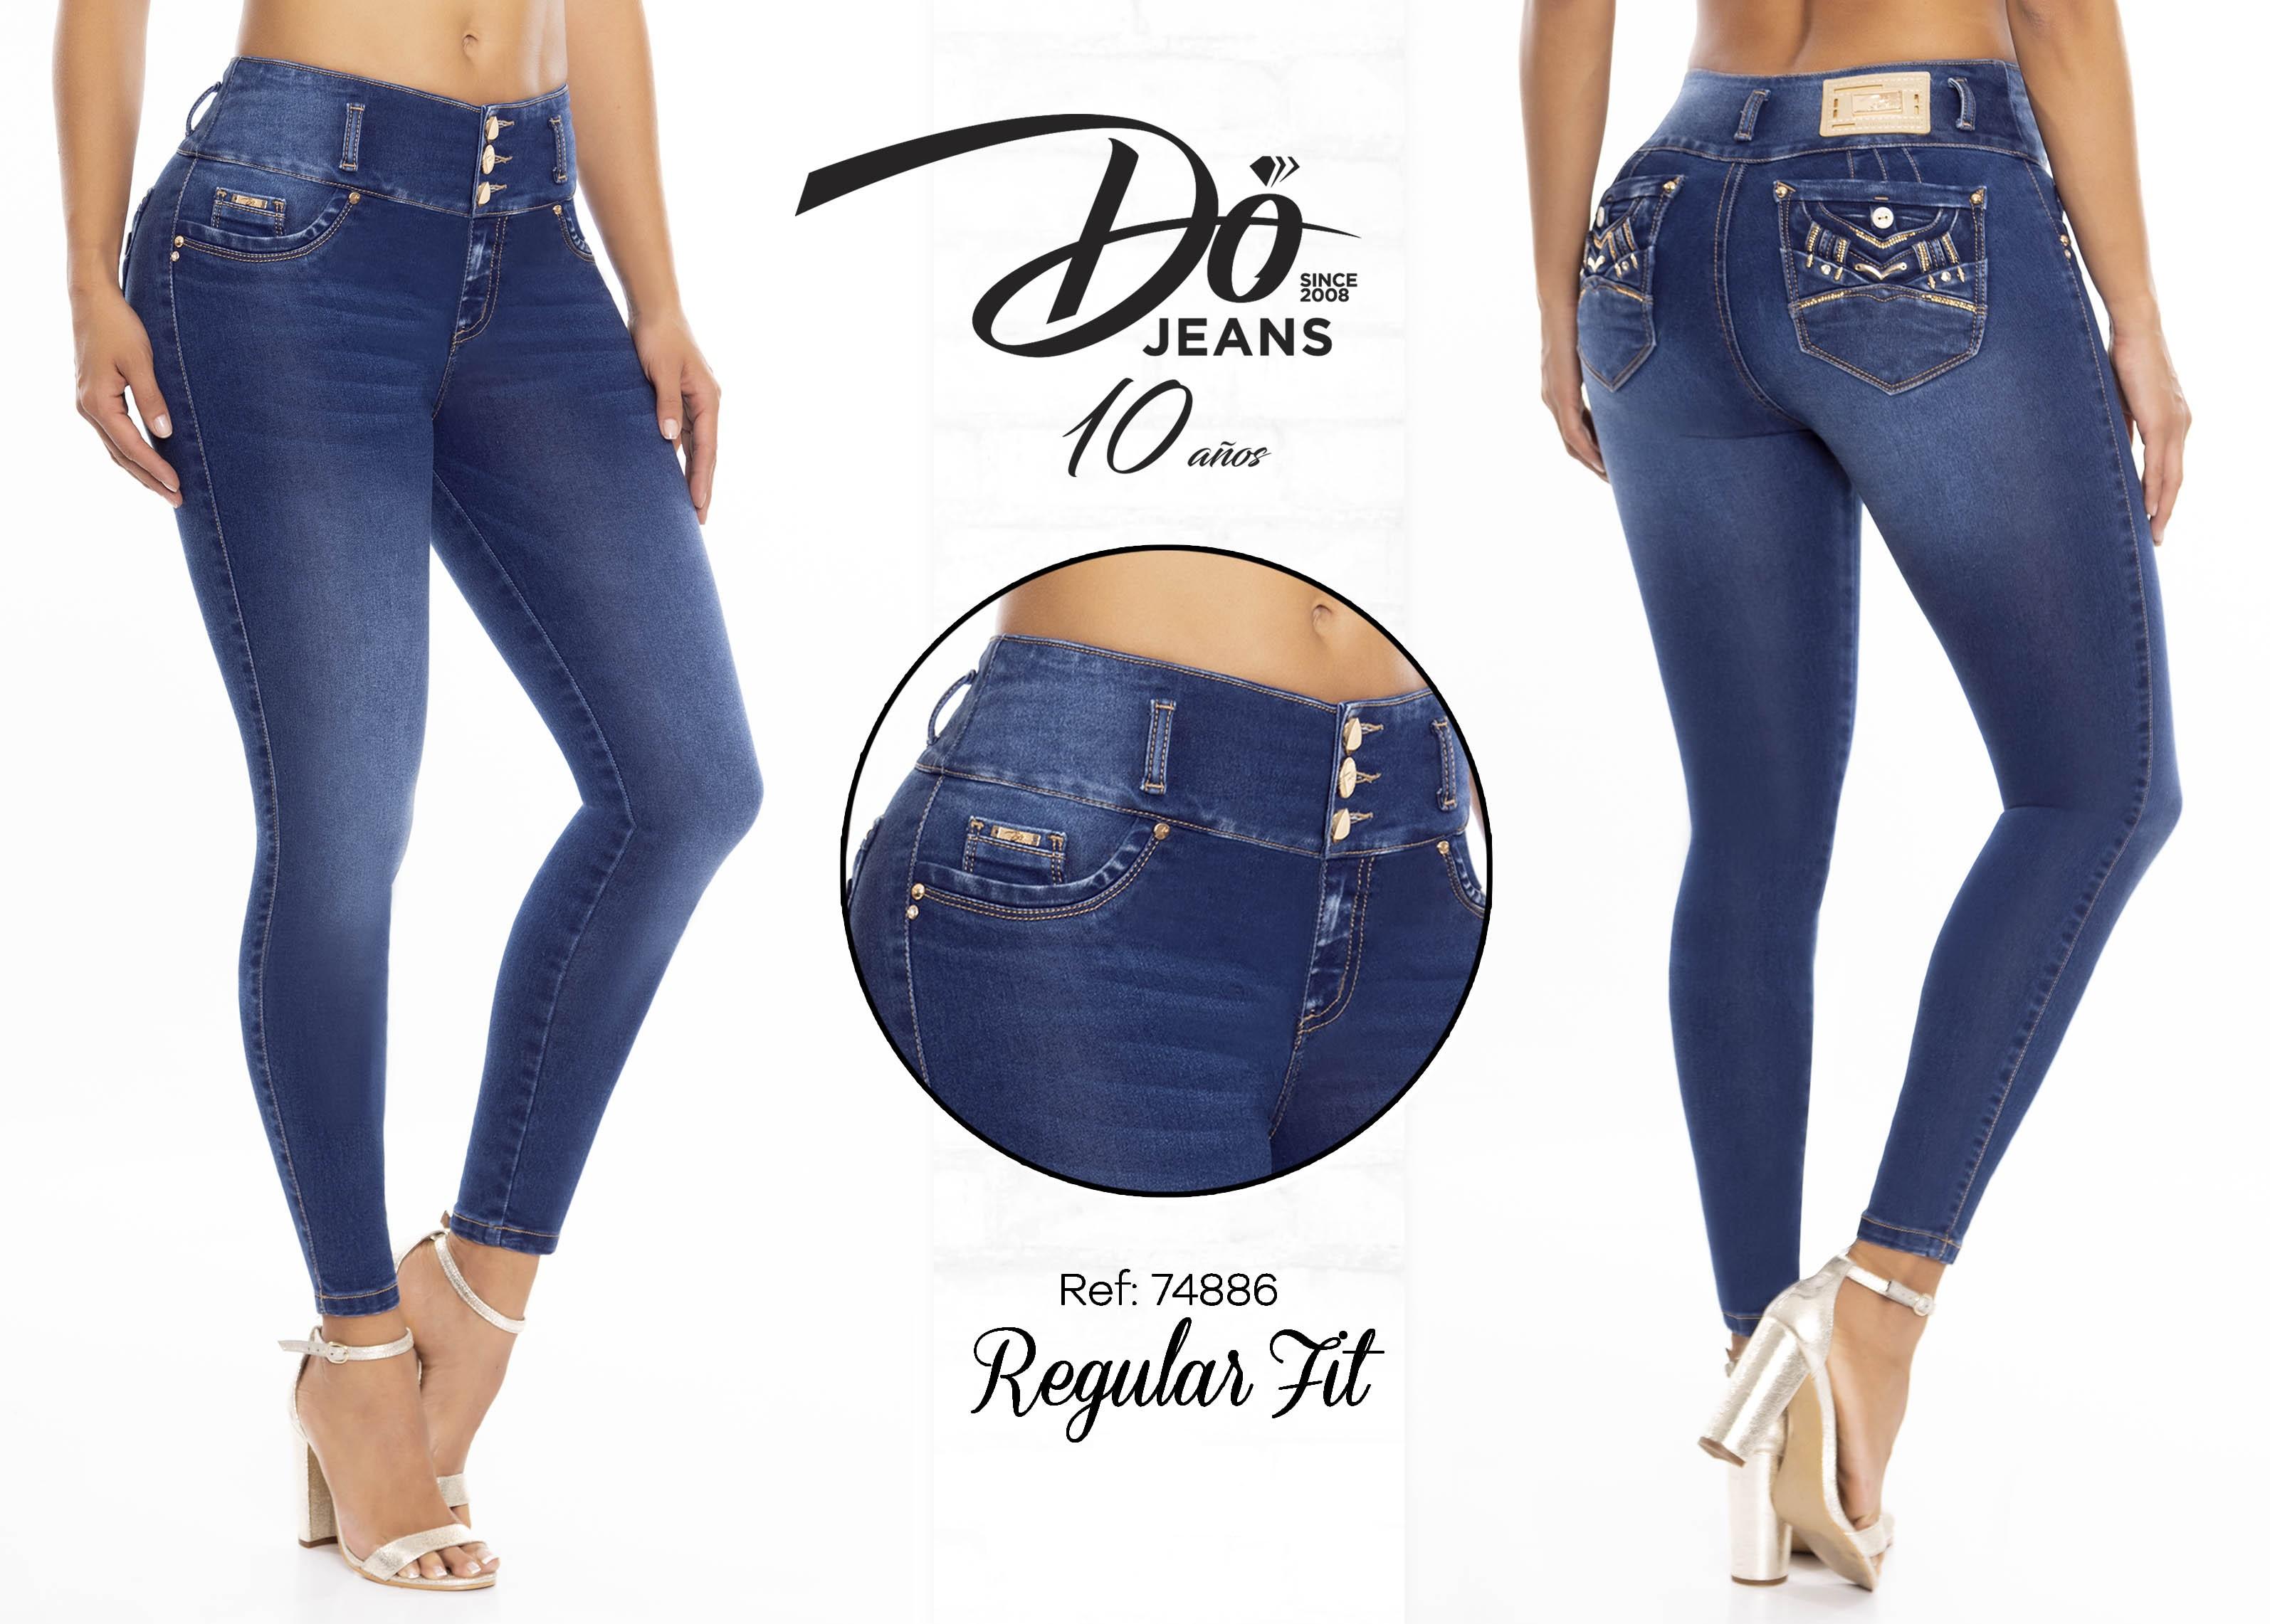 Jeans Levantacola Colombiano - Ref. 248 -74886 D